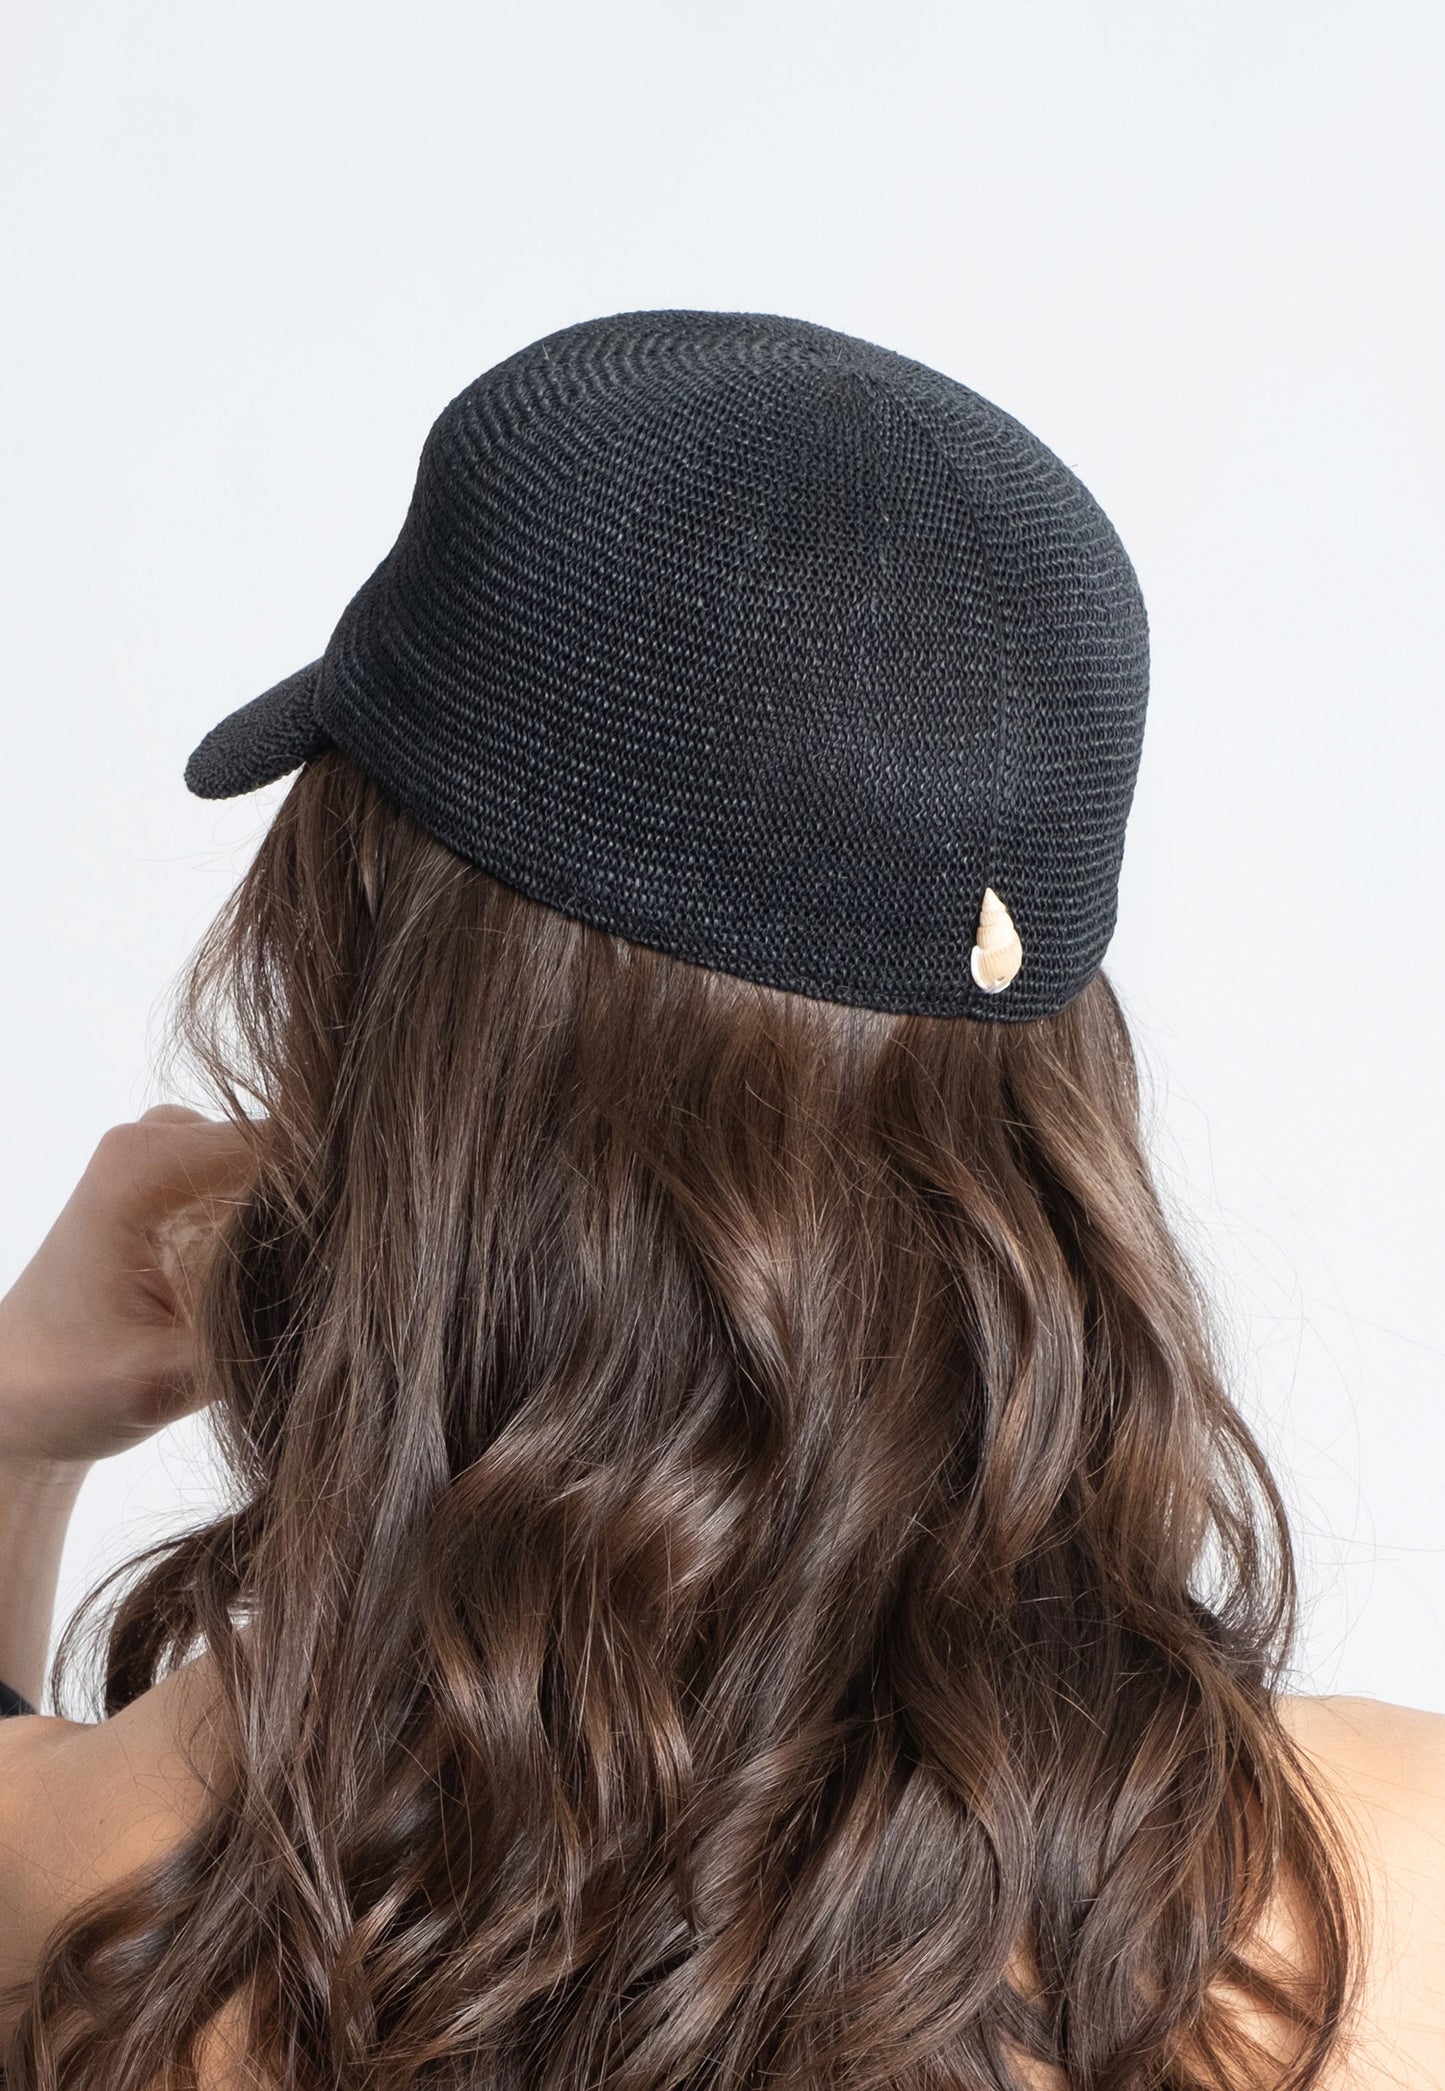 Black straw cap with natural shell.